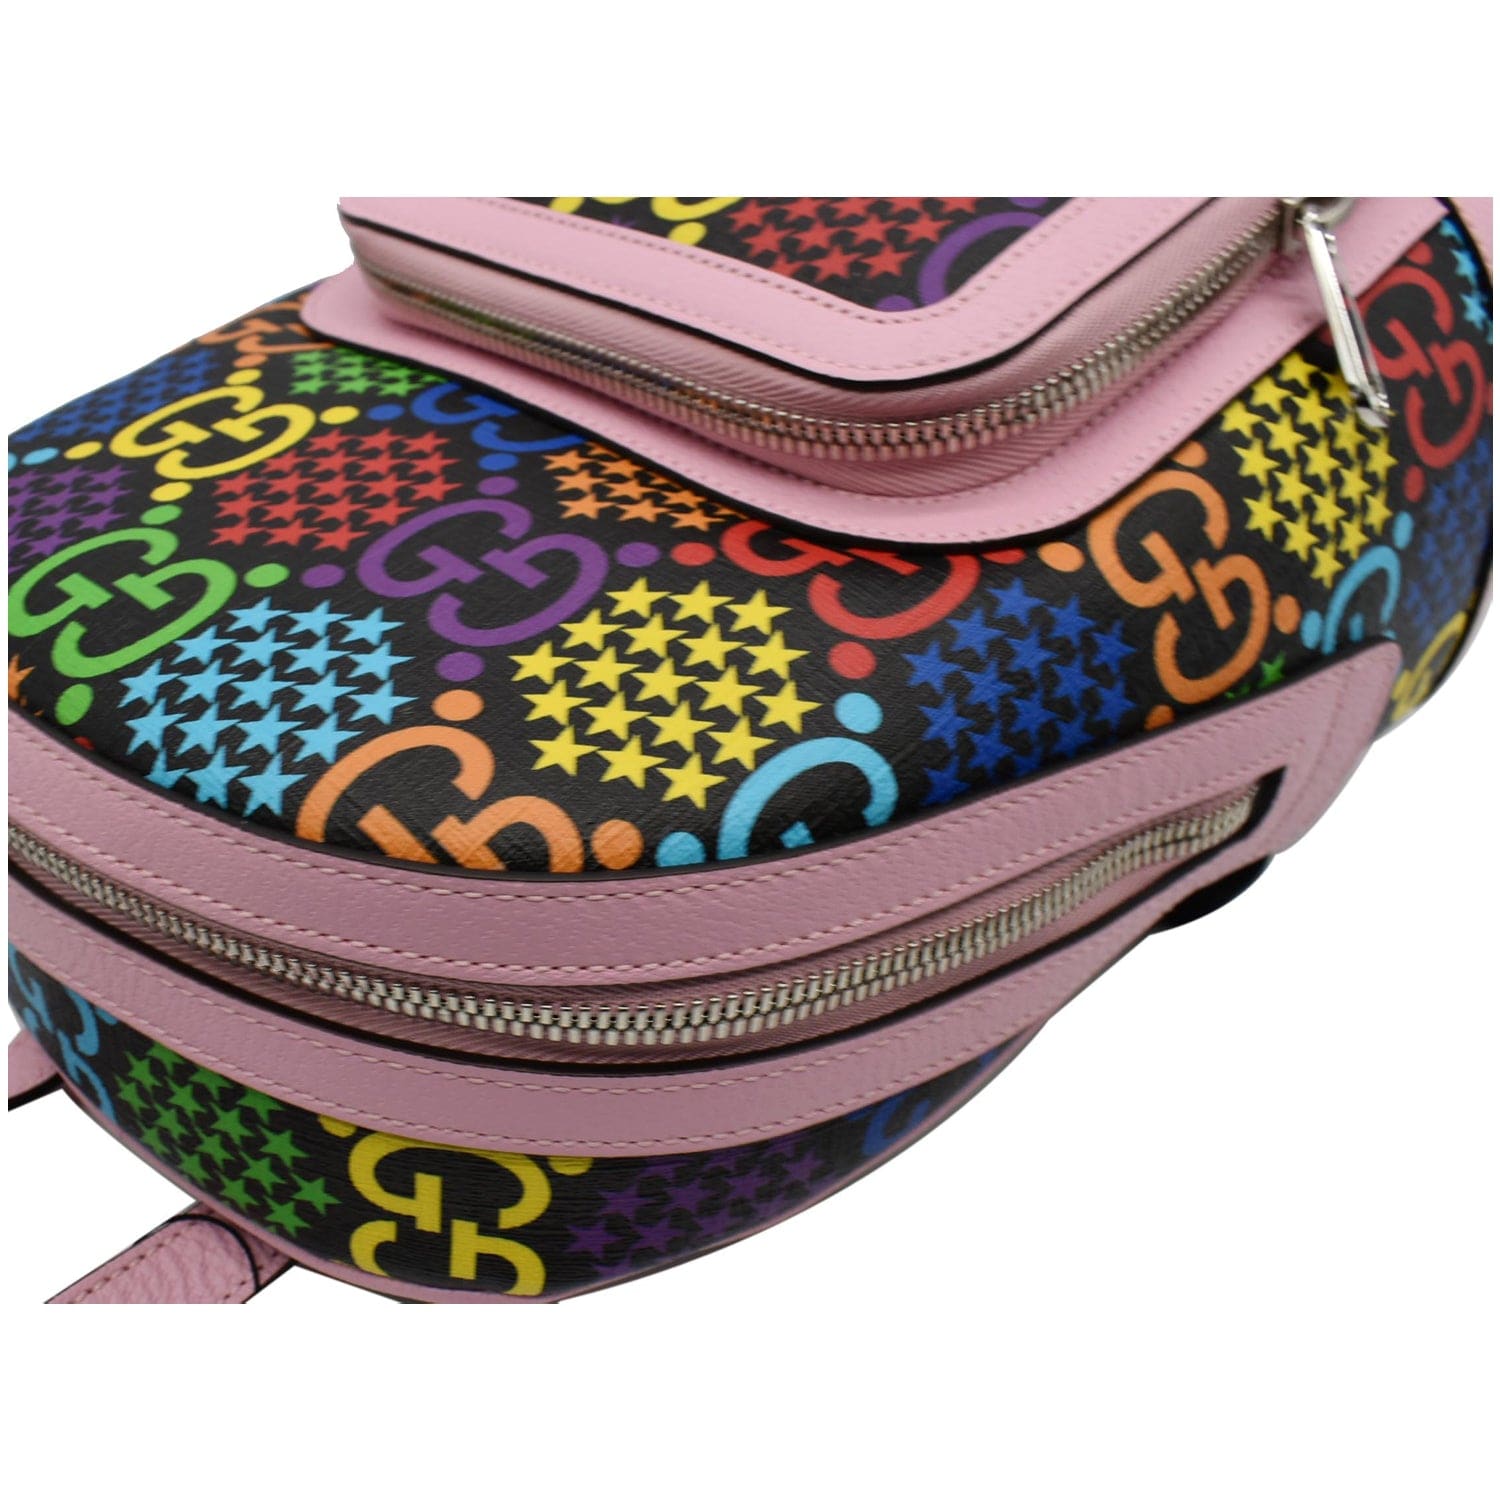 Gucci Pink GG Supreme Psychedelic Backpack Cloth Cloth ref.819628